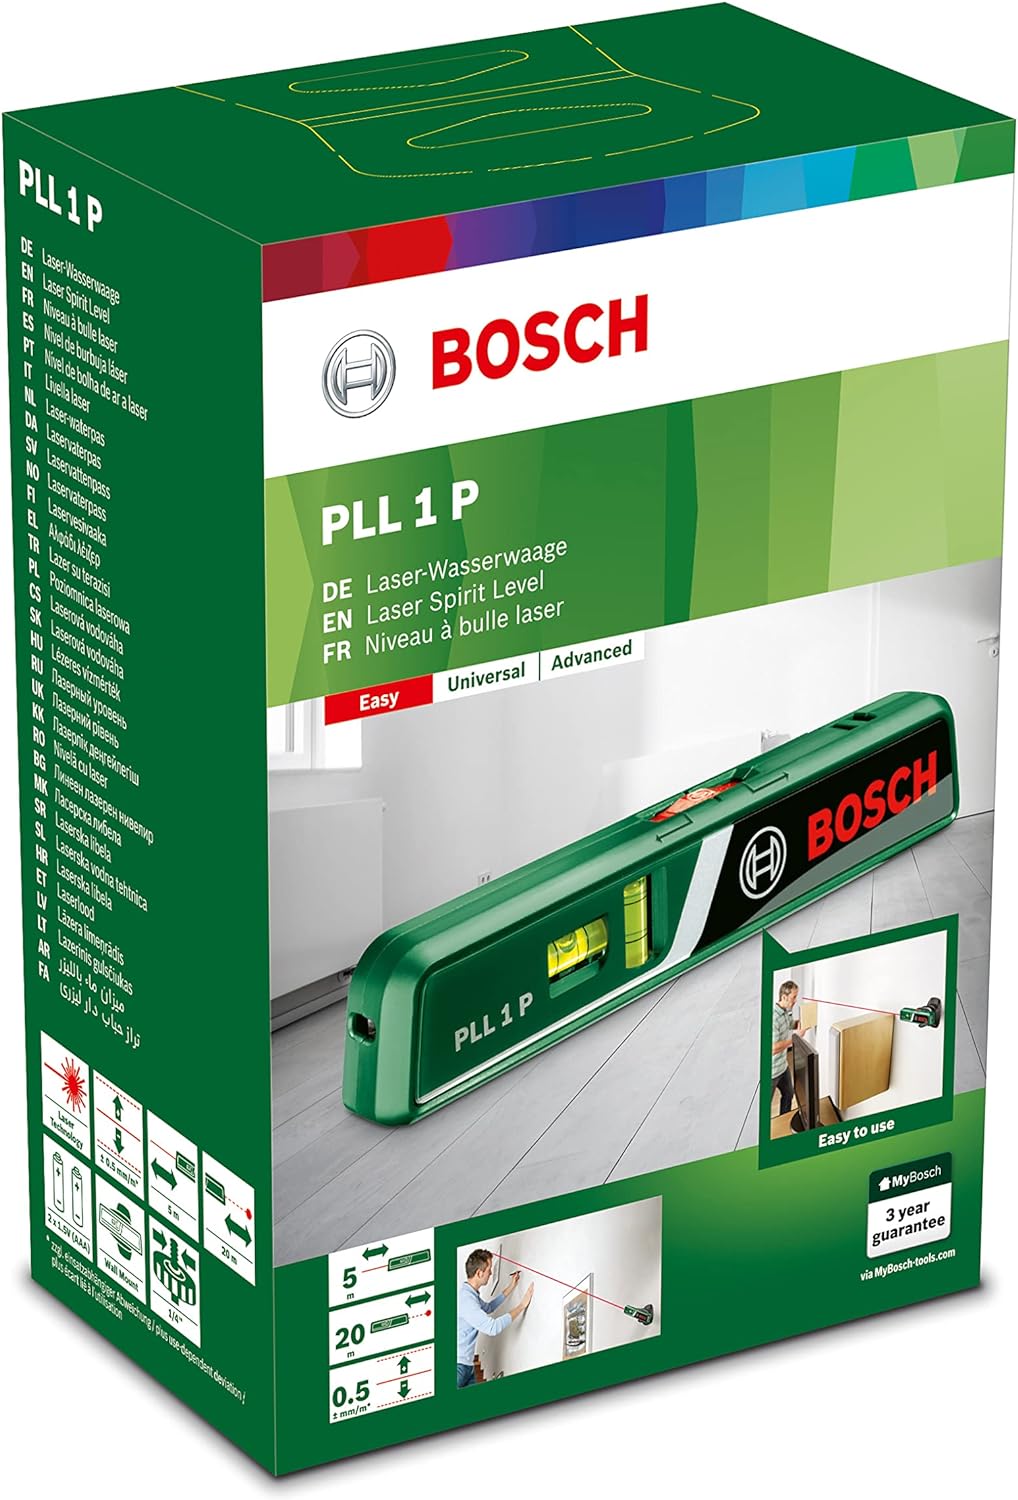 Bosch detector Truvo (easy one-button handling, live cables metal wall scanner)